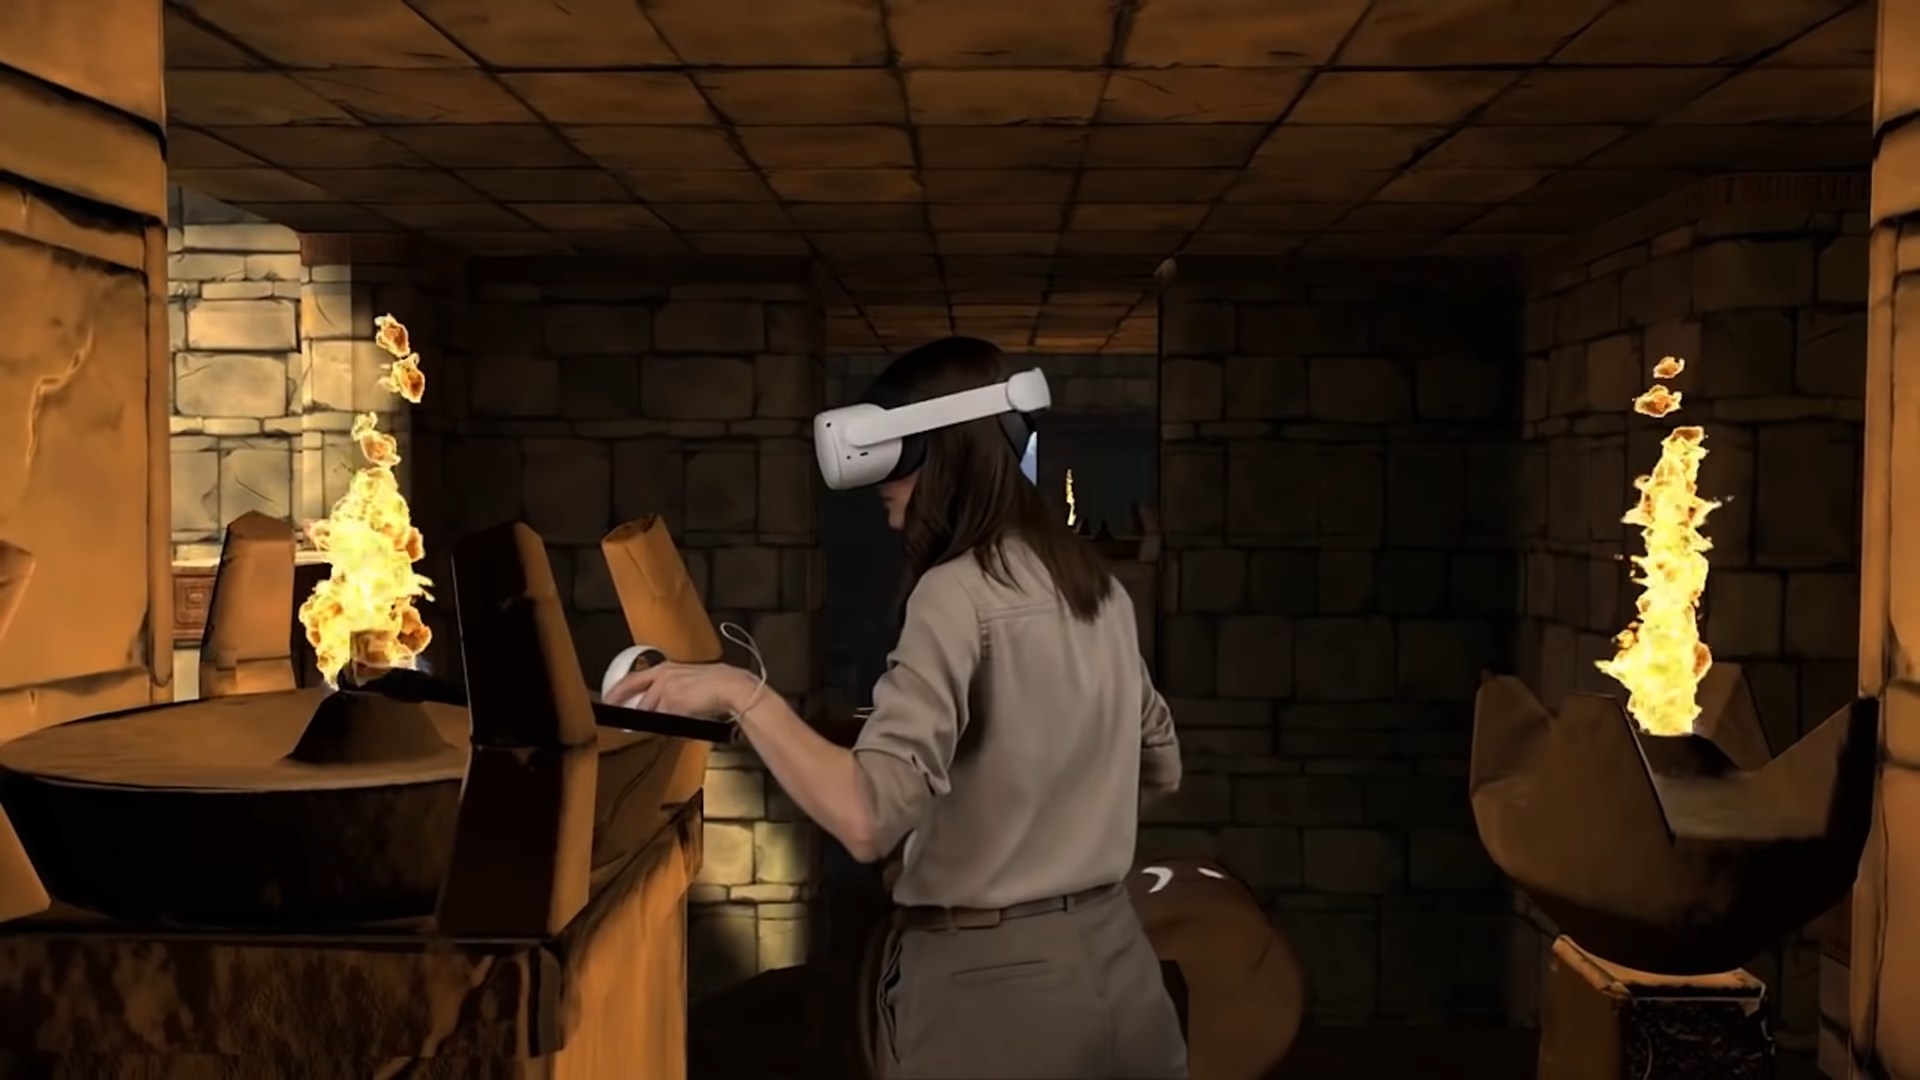 Image of a person using a VR headset for a Made with Unity game